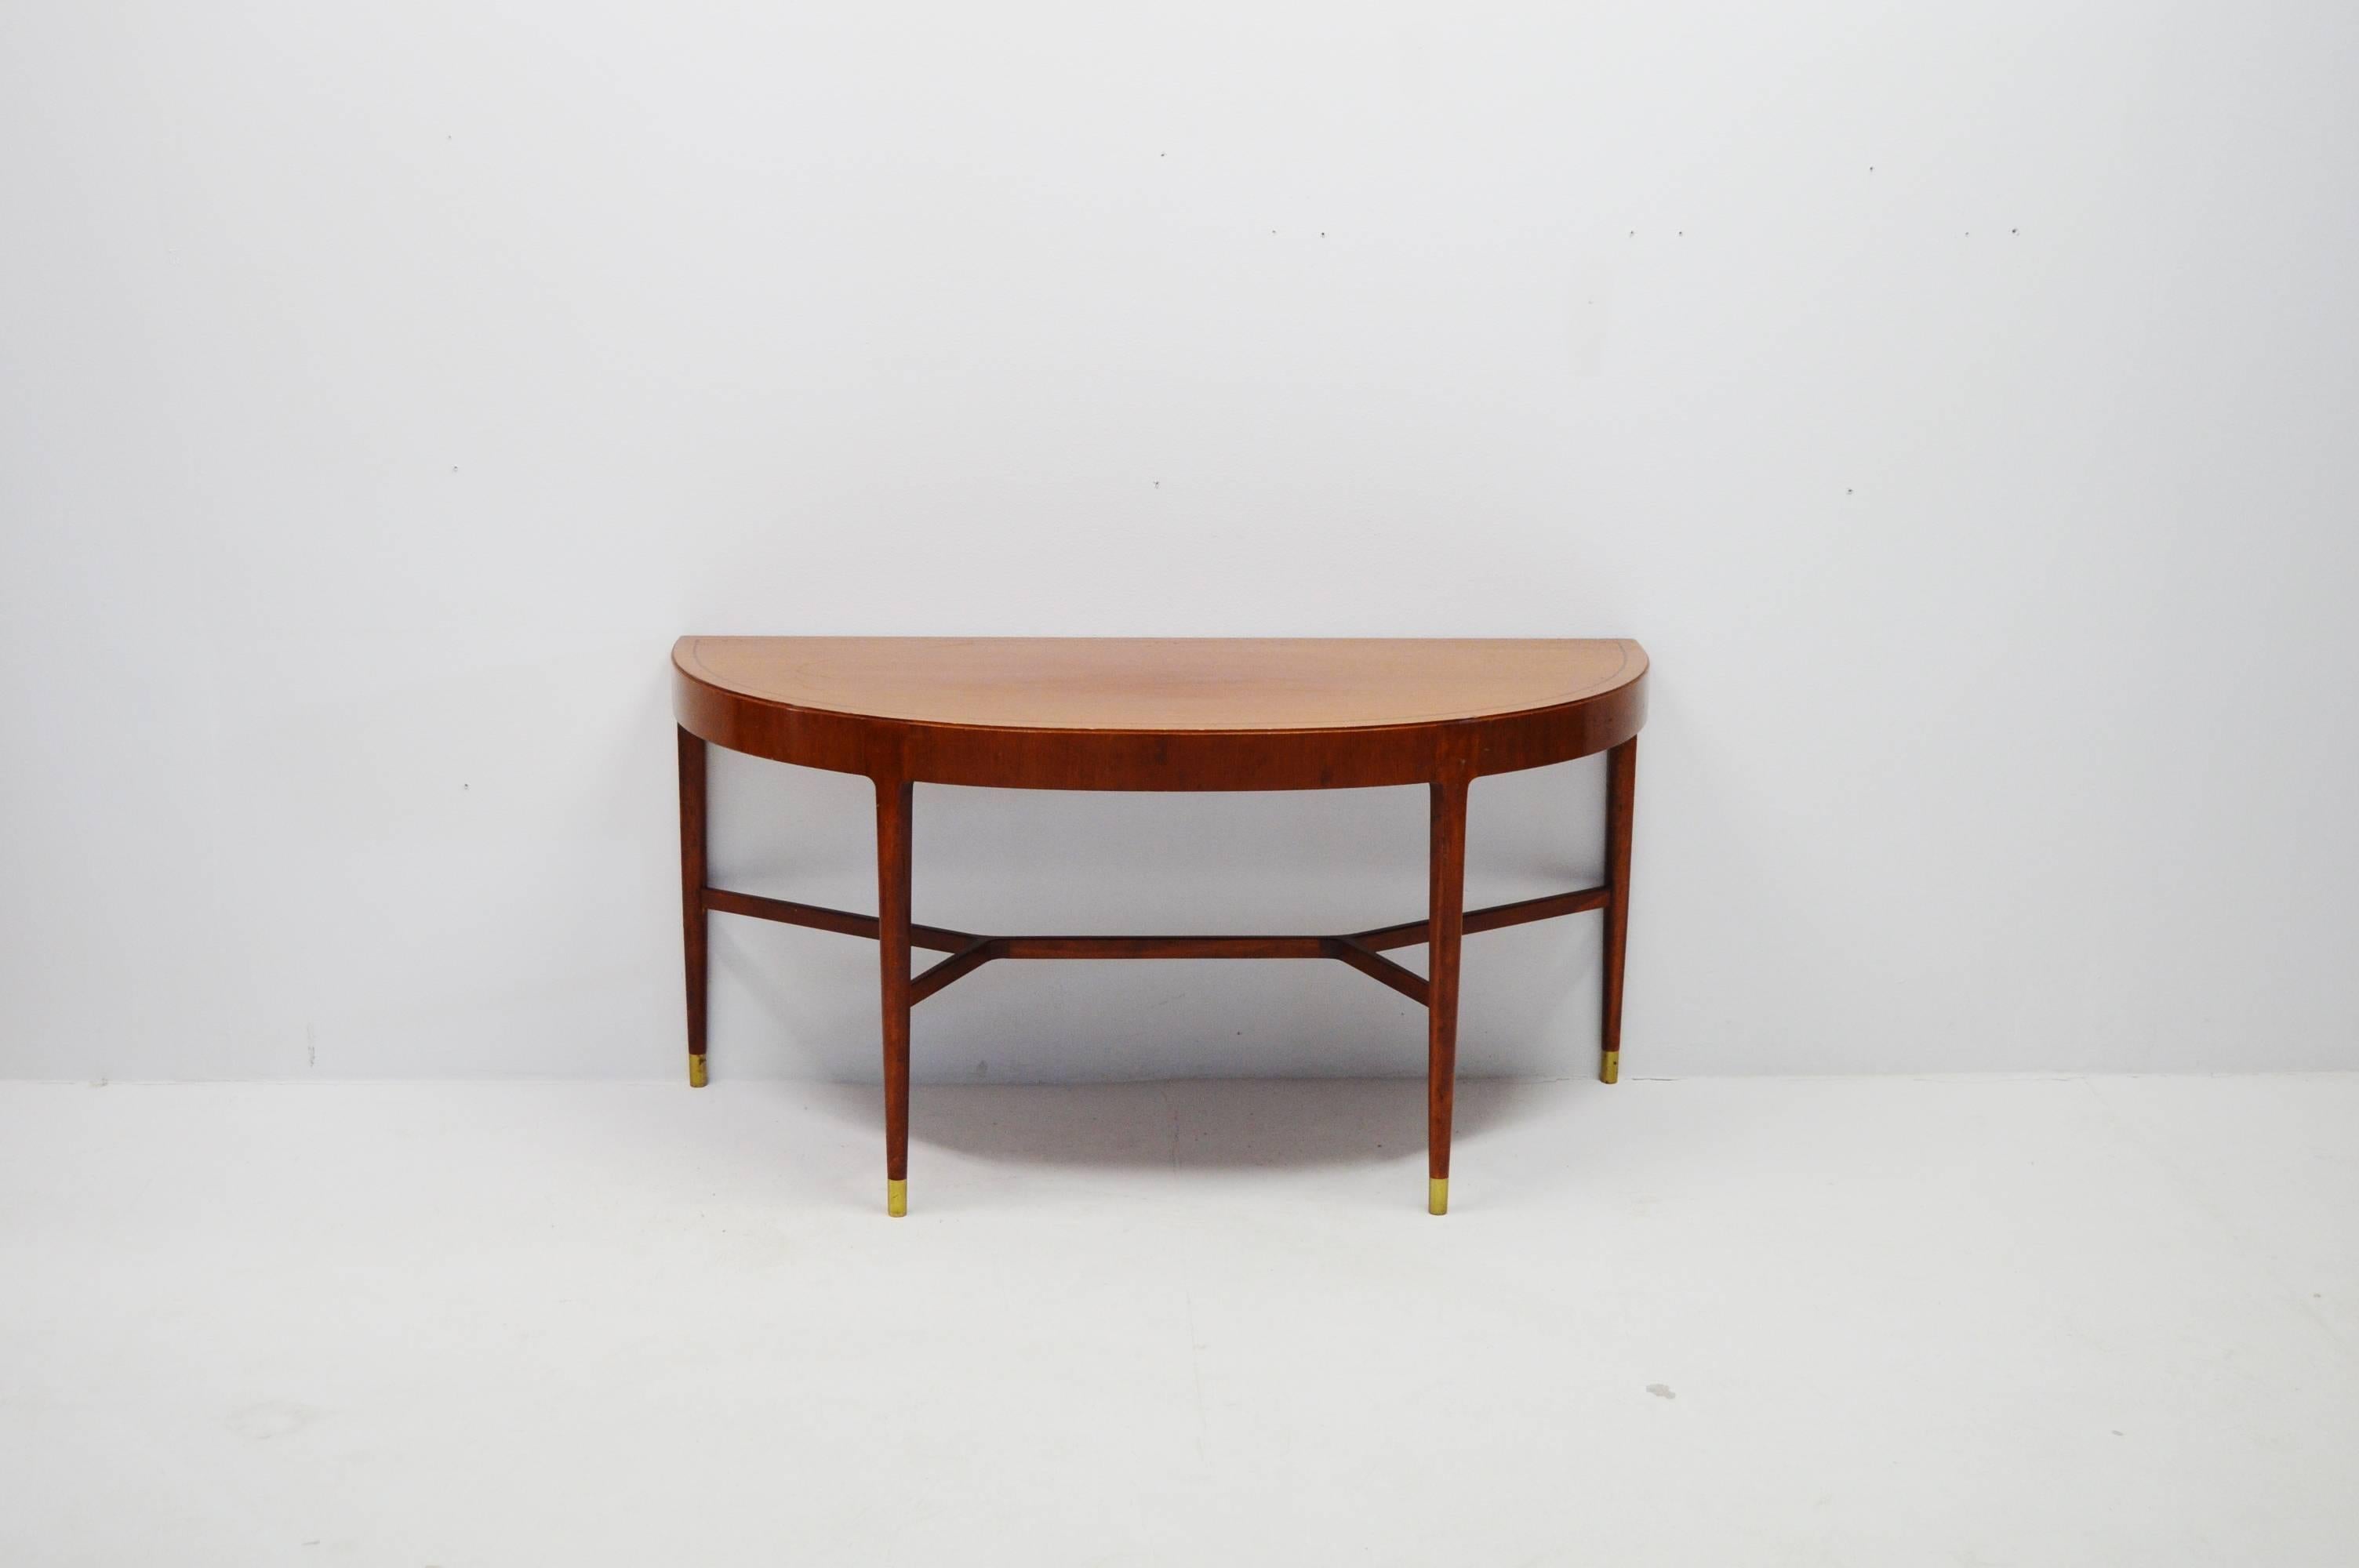 1950s Half Moon Mahogany Crescent or Console Table with Brass Fittings In Good Condition For Sale In Alvesta, SE